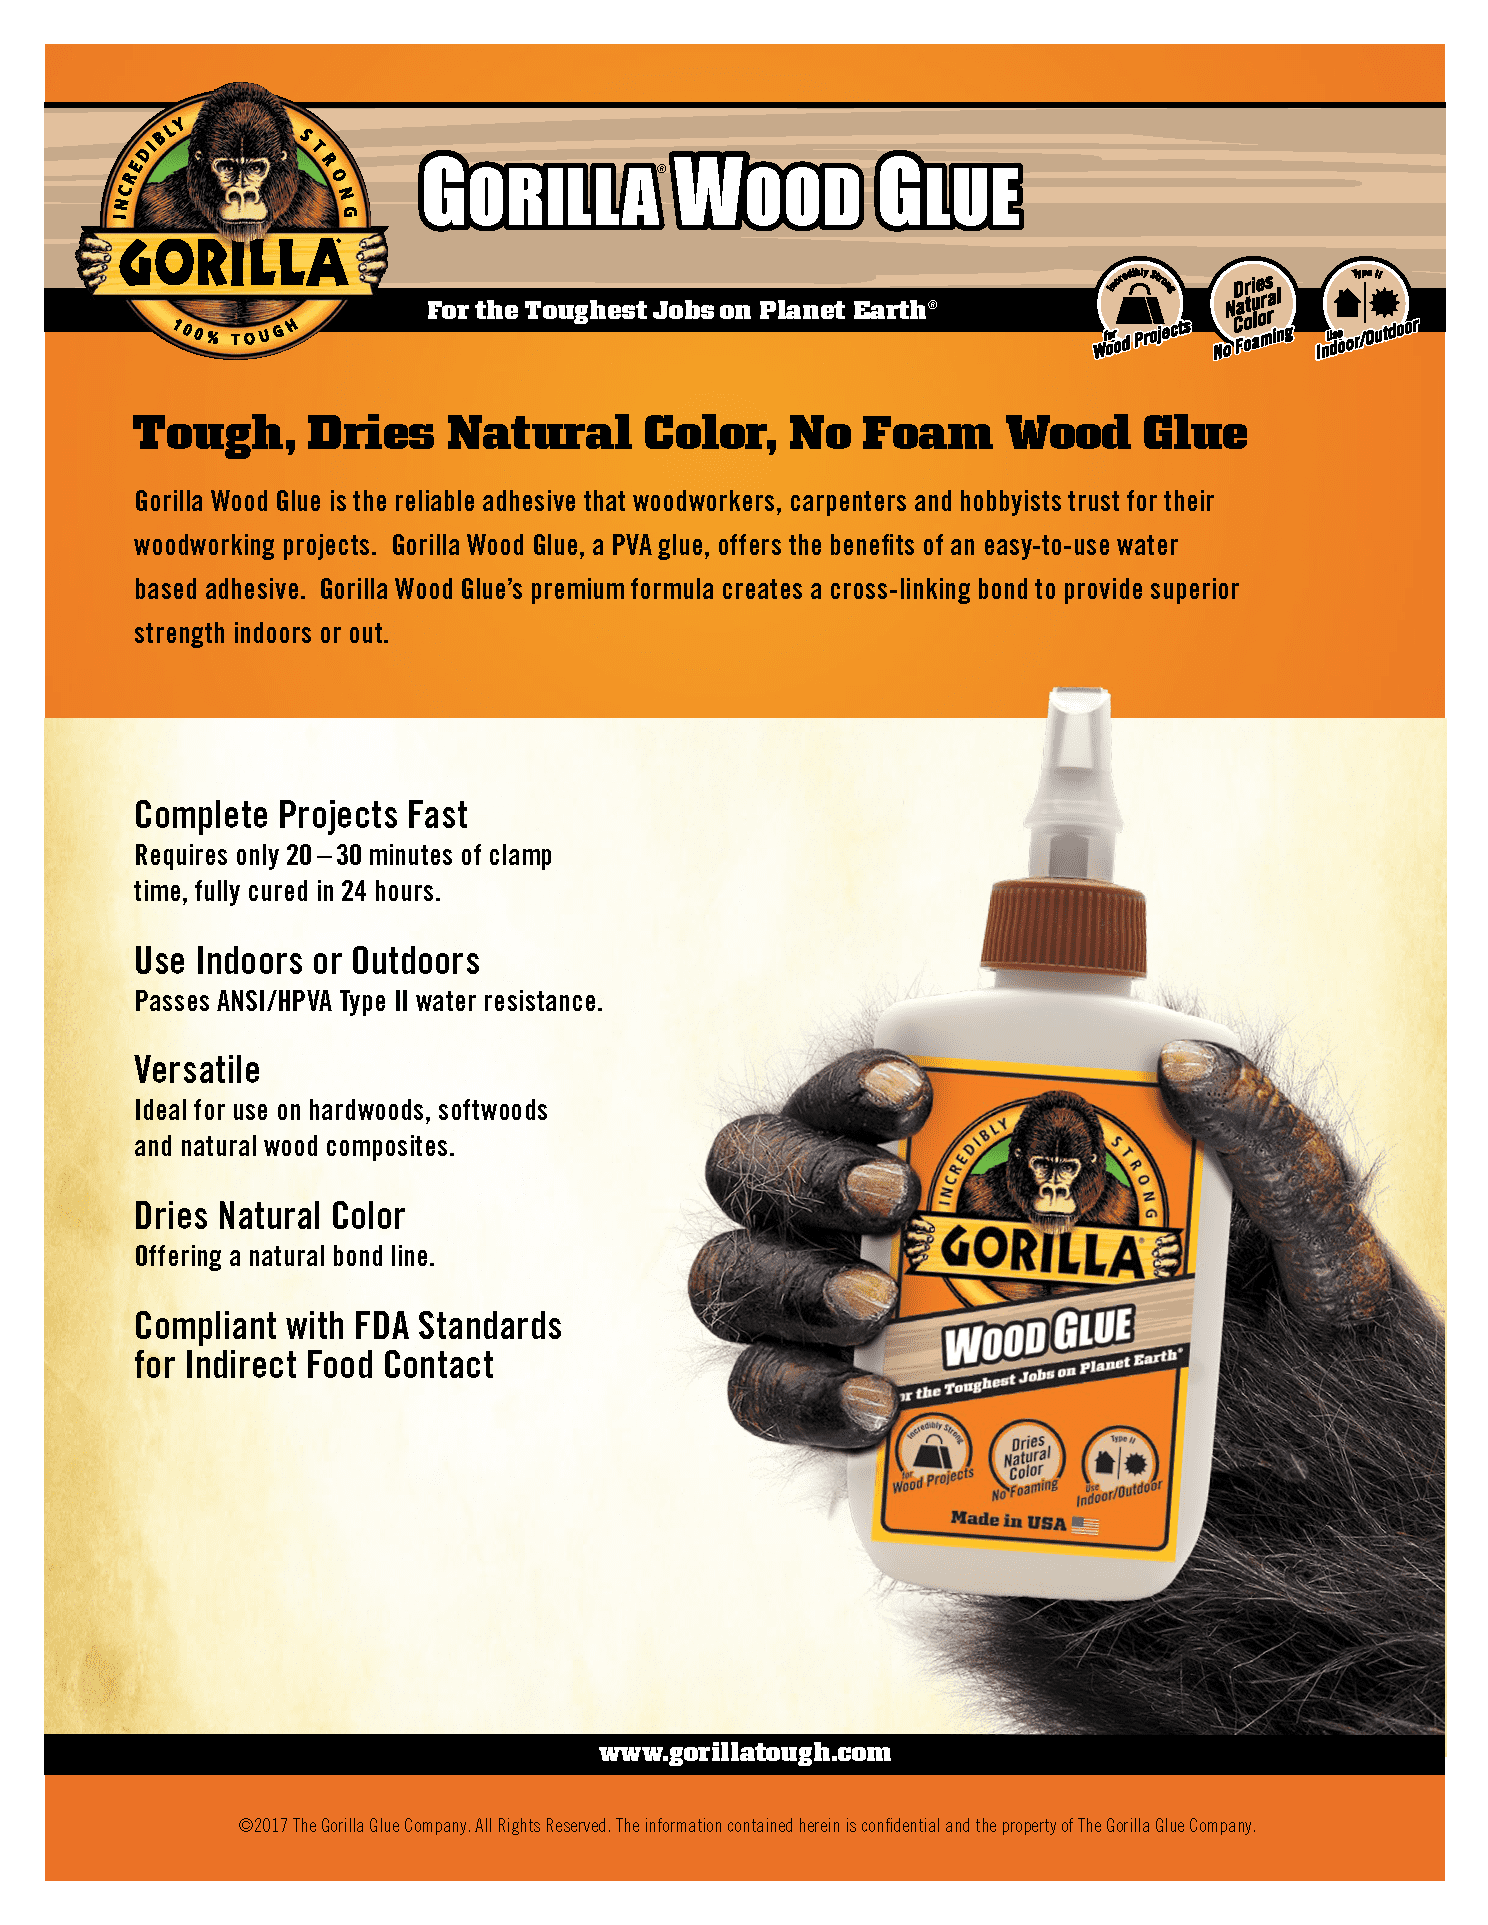 Gorilla Glue on X: Gorilla Wood Glue is water resistant and dries a  natural color that offers an invisible bond line for your projects.  #womenwoodworkers #diy #diyhomedecor #diyideas #projectoftheday  #diyfurniture #diywoodwork #carpenterlife #